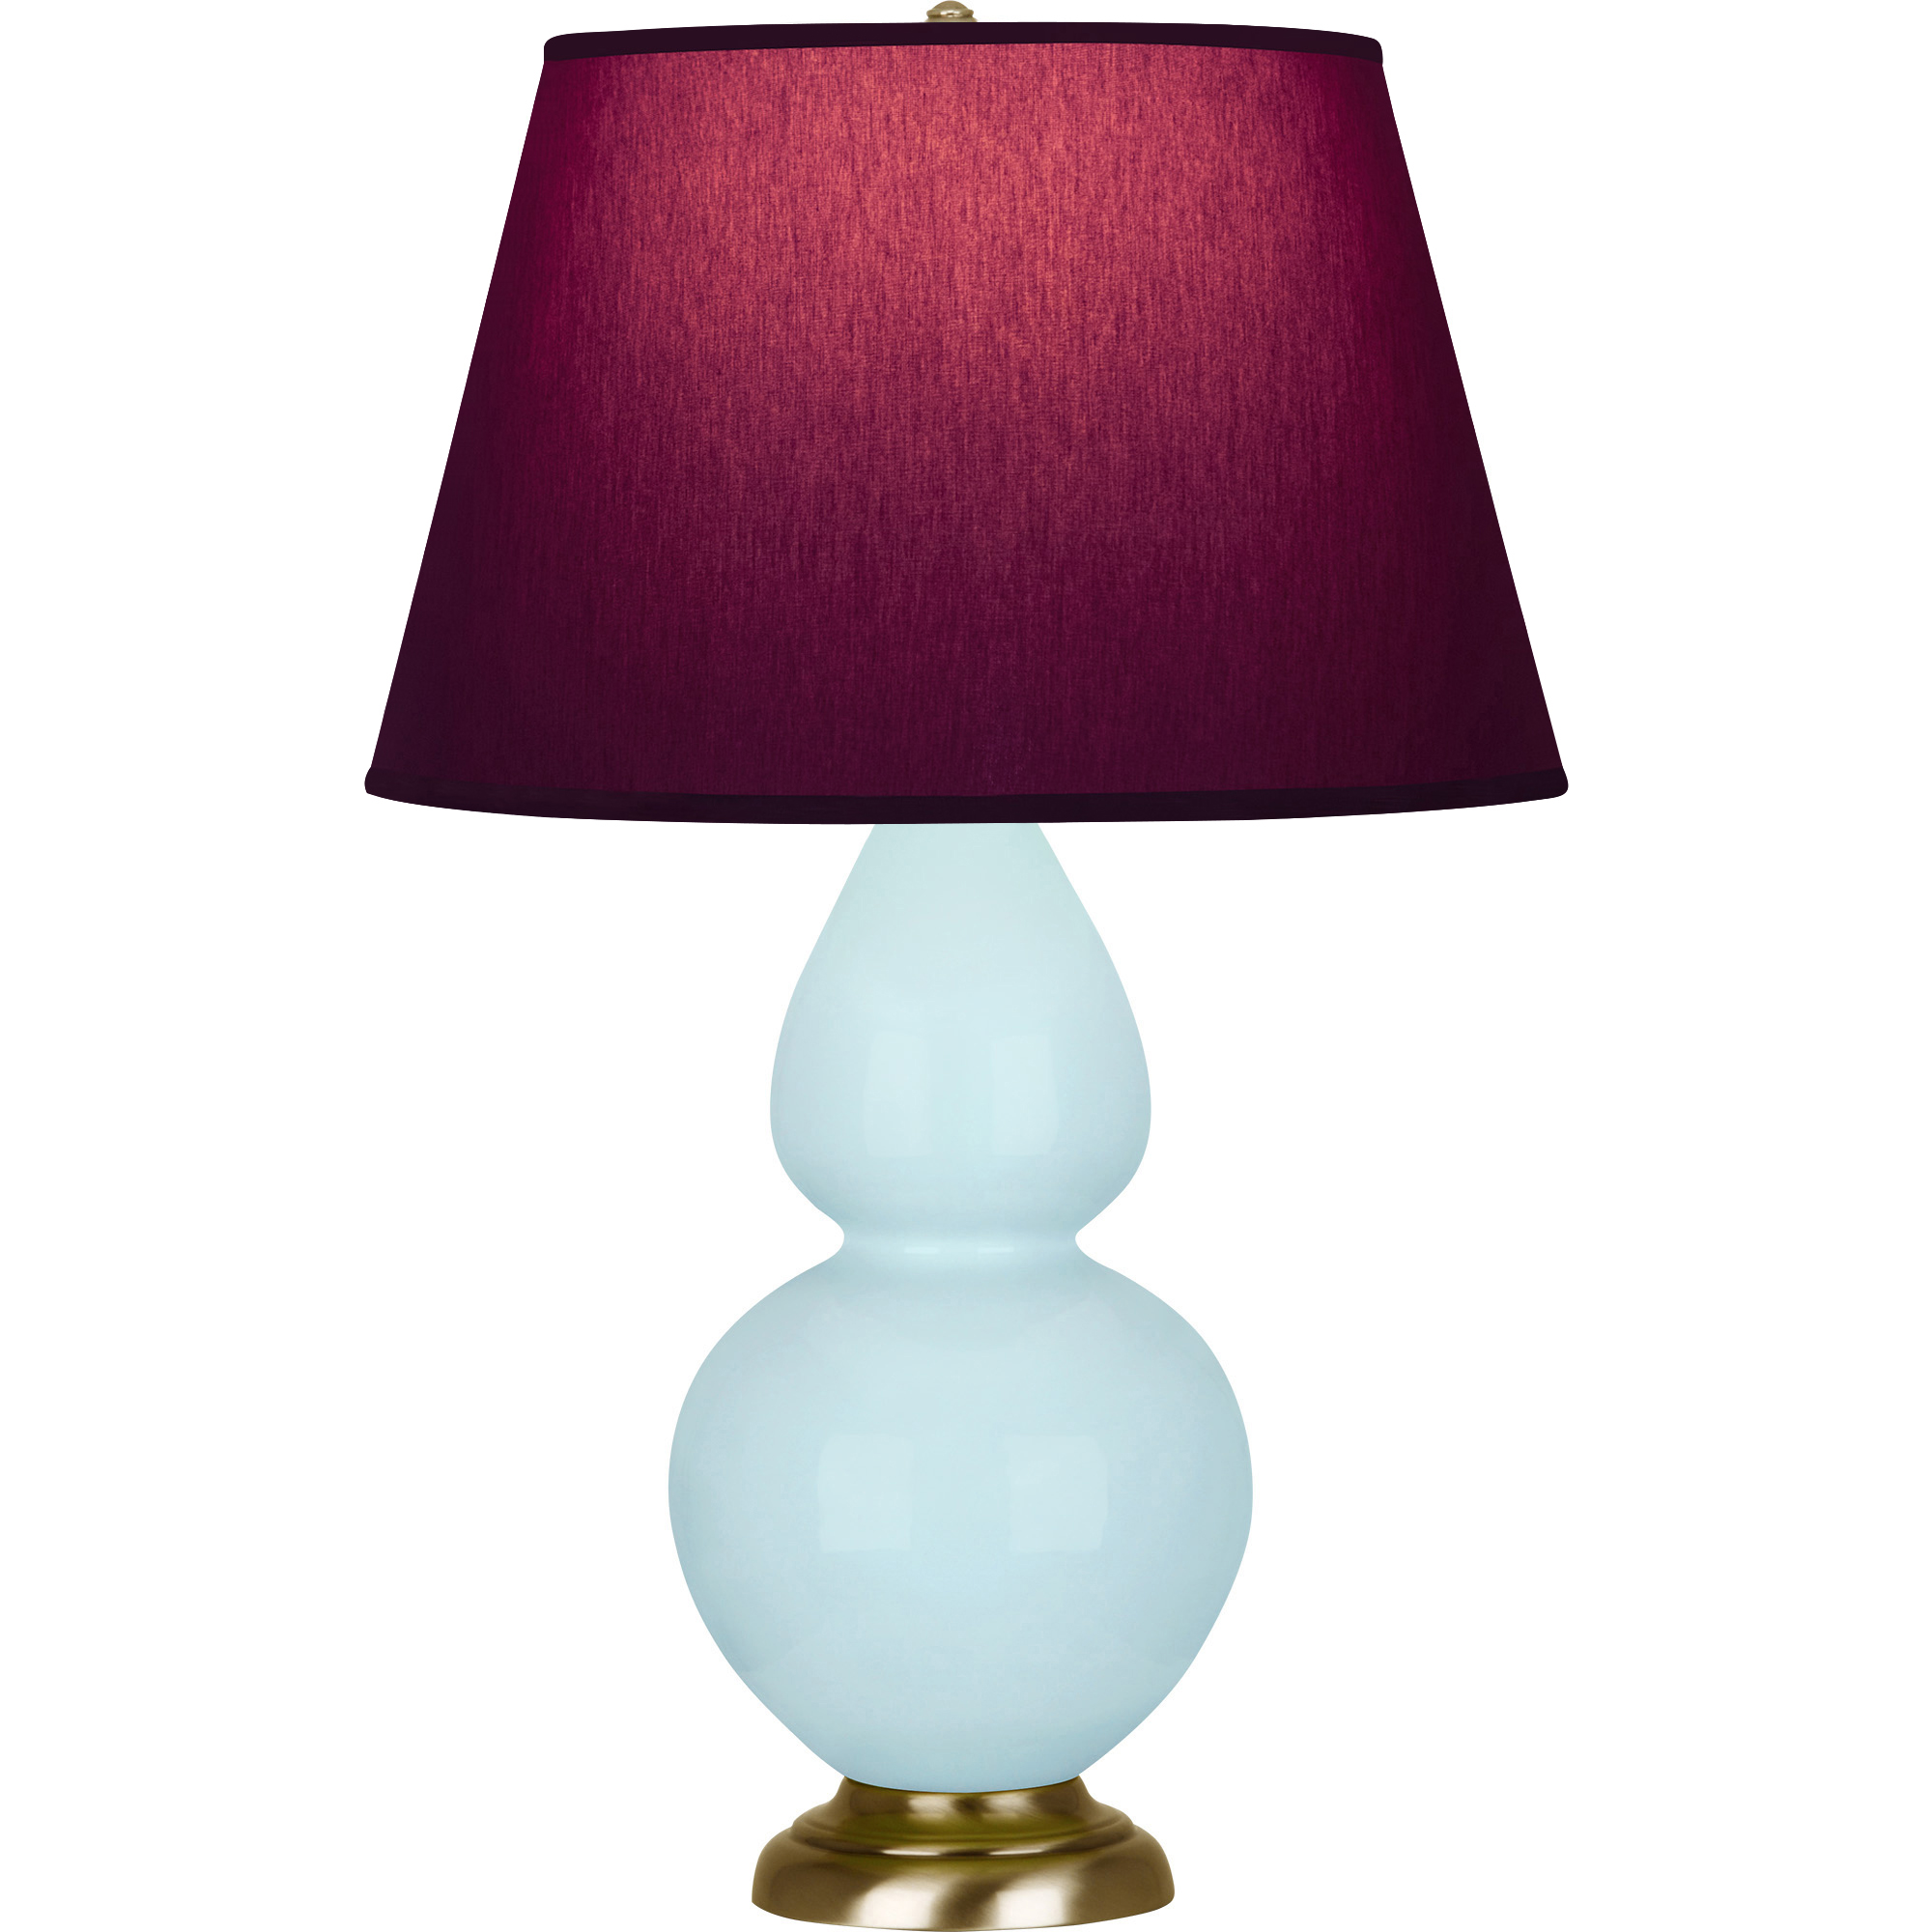 Double Gourd Table Lamp Style #1666P